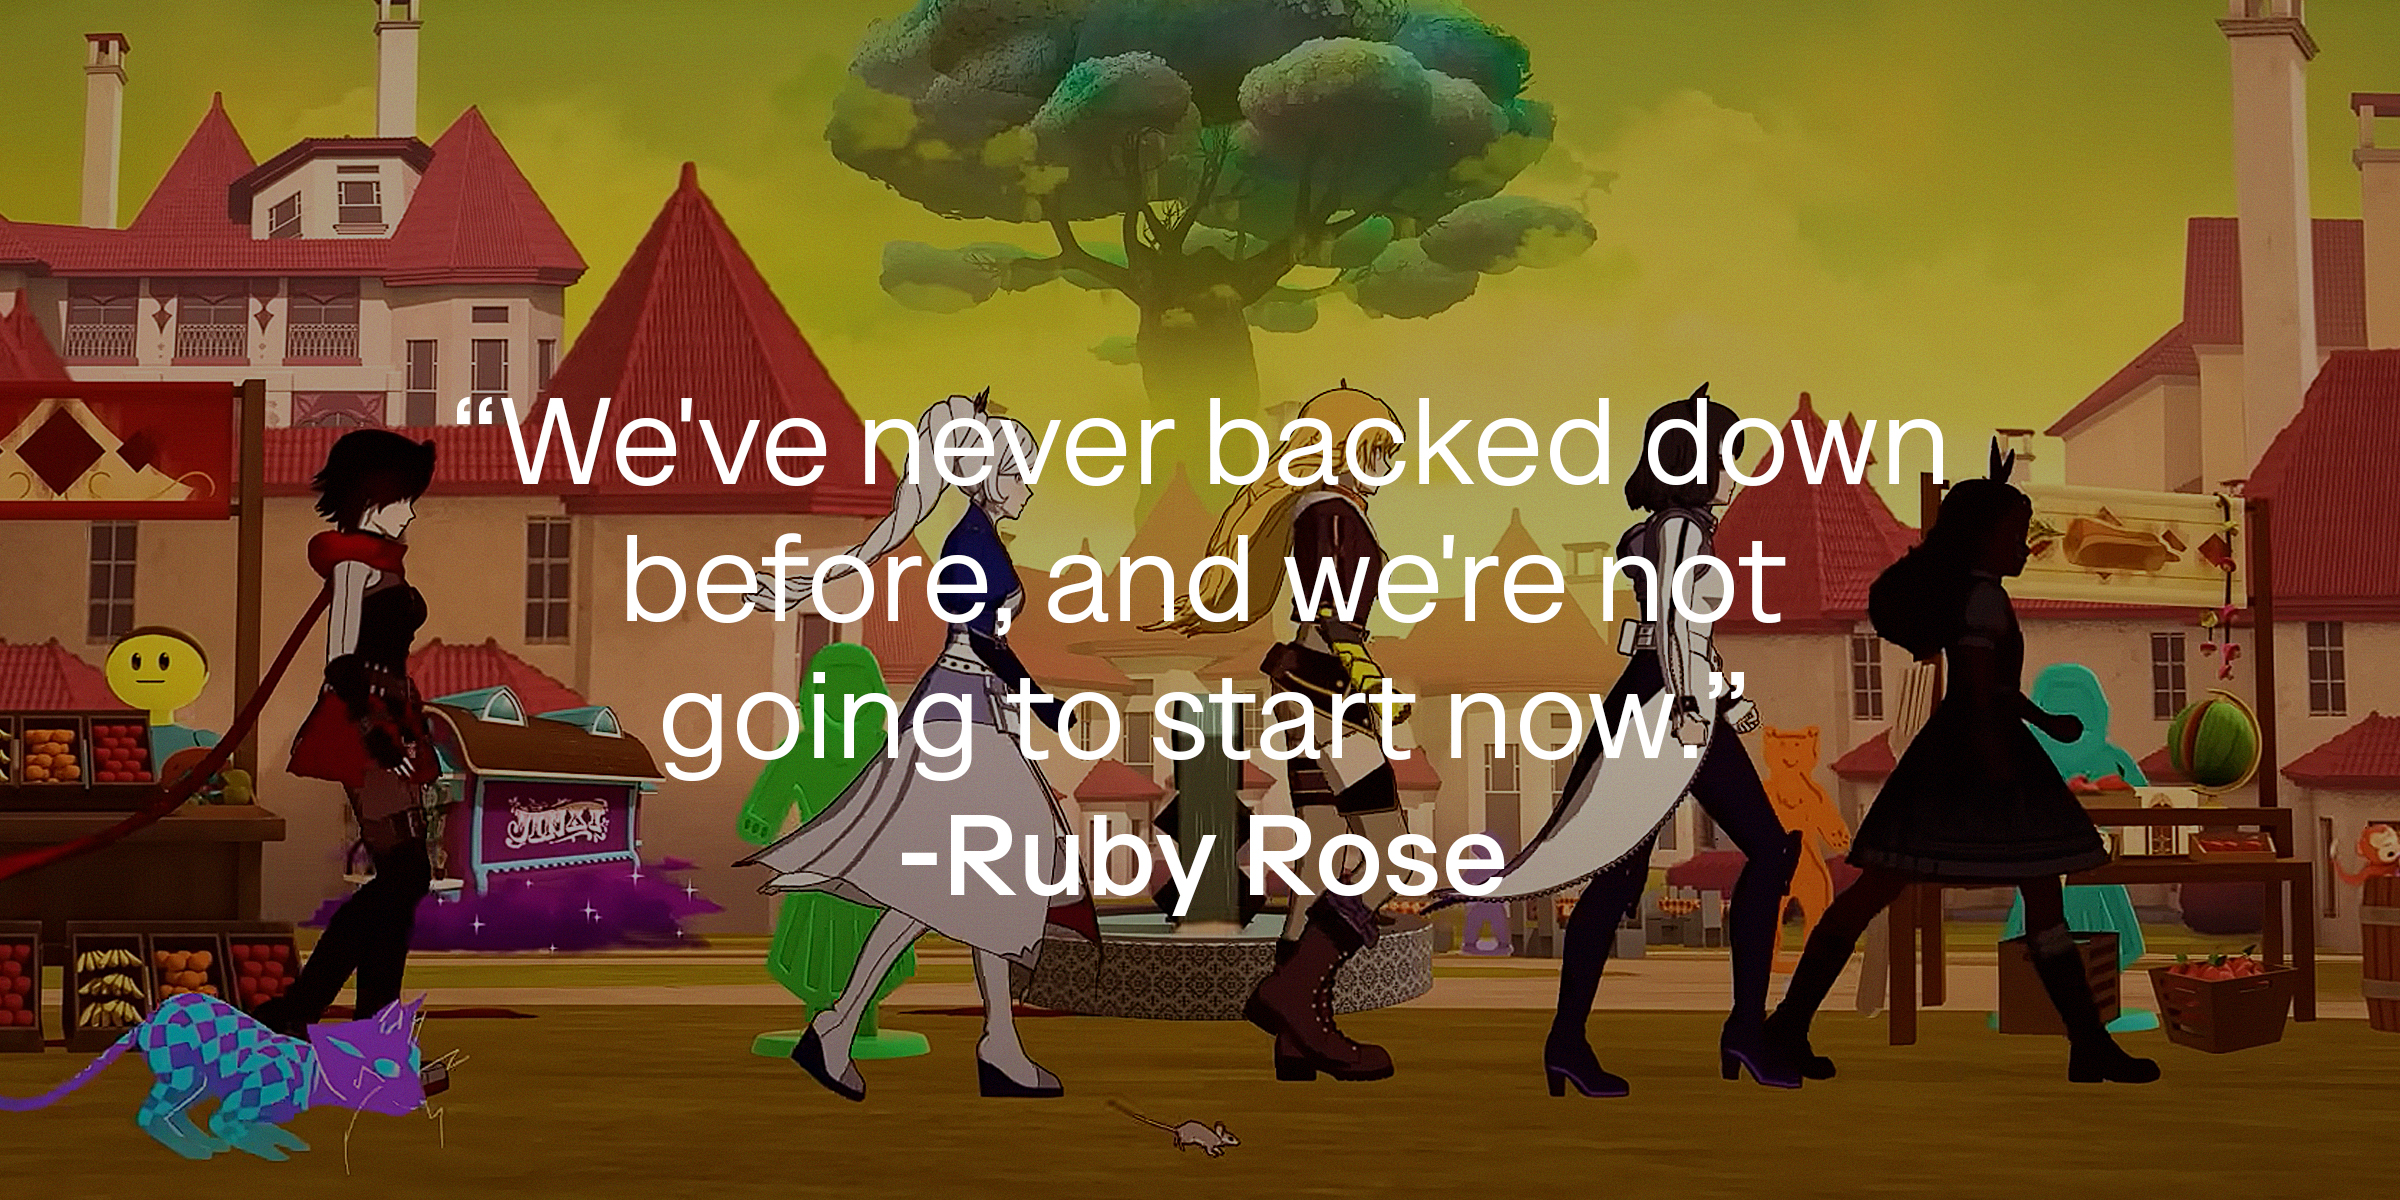 Photo of "RWBY" characters with the quote: "We've never backed down before, and we're not going to start now." | Source: Youtube.com/crunchyrolldubs